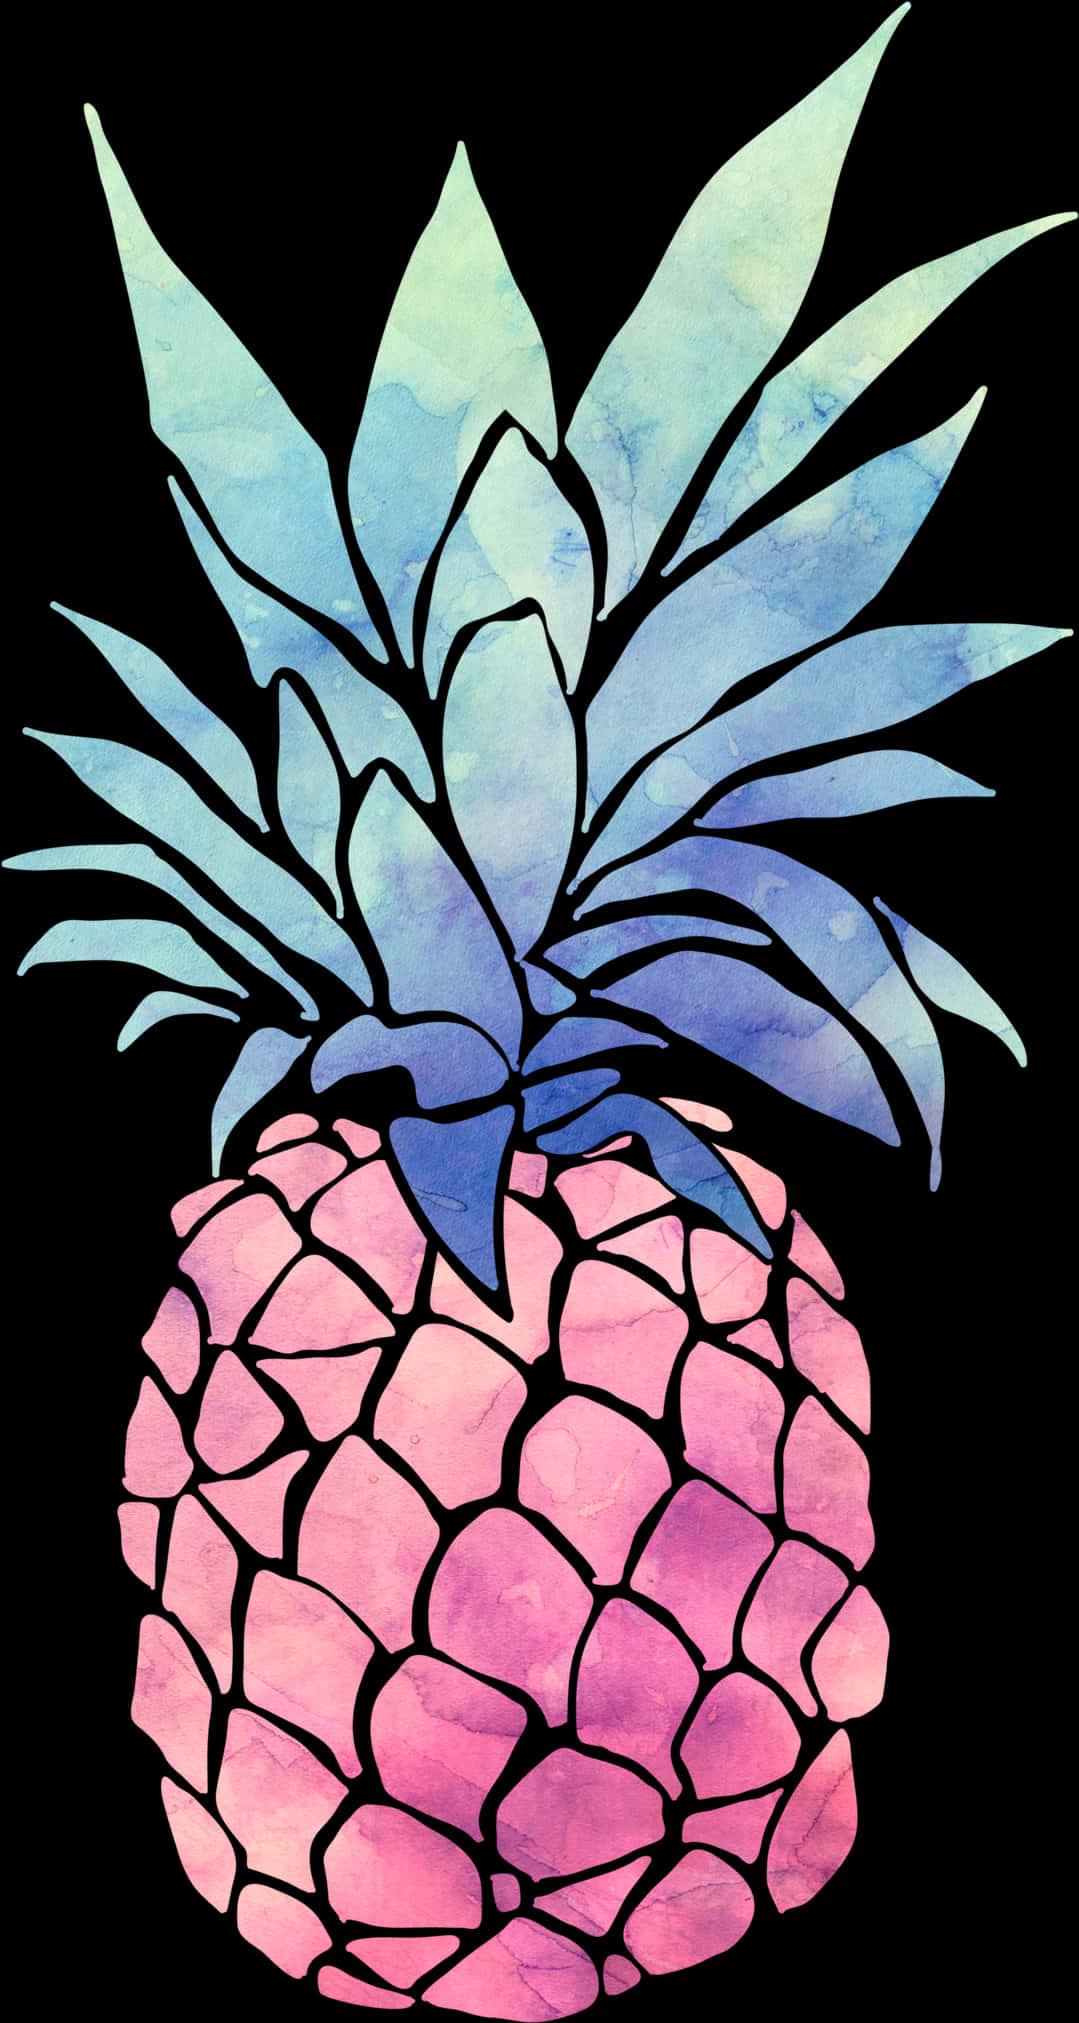 Abstract Watercolor Pineapple Art